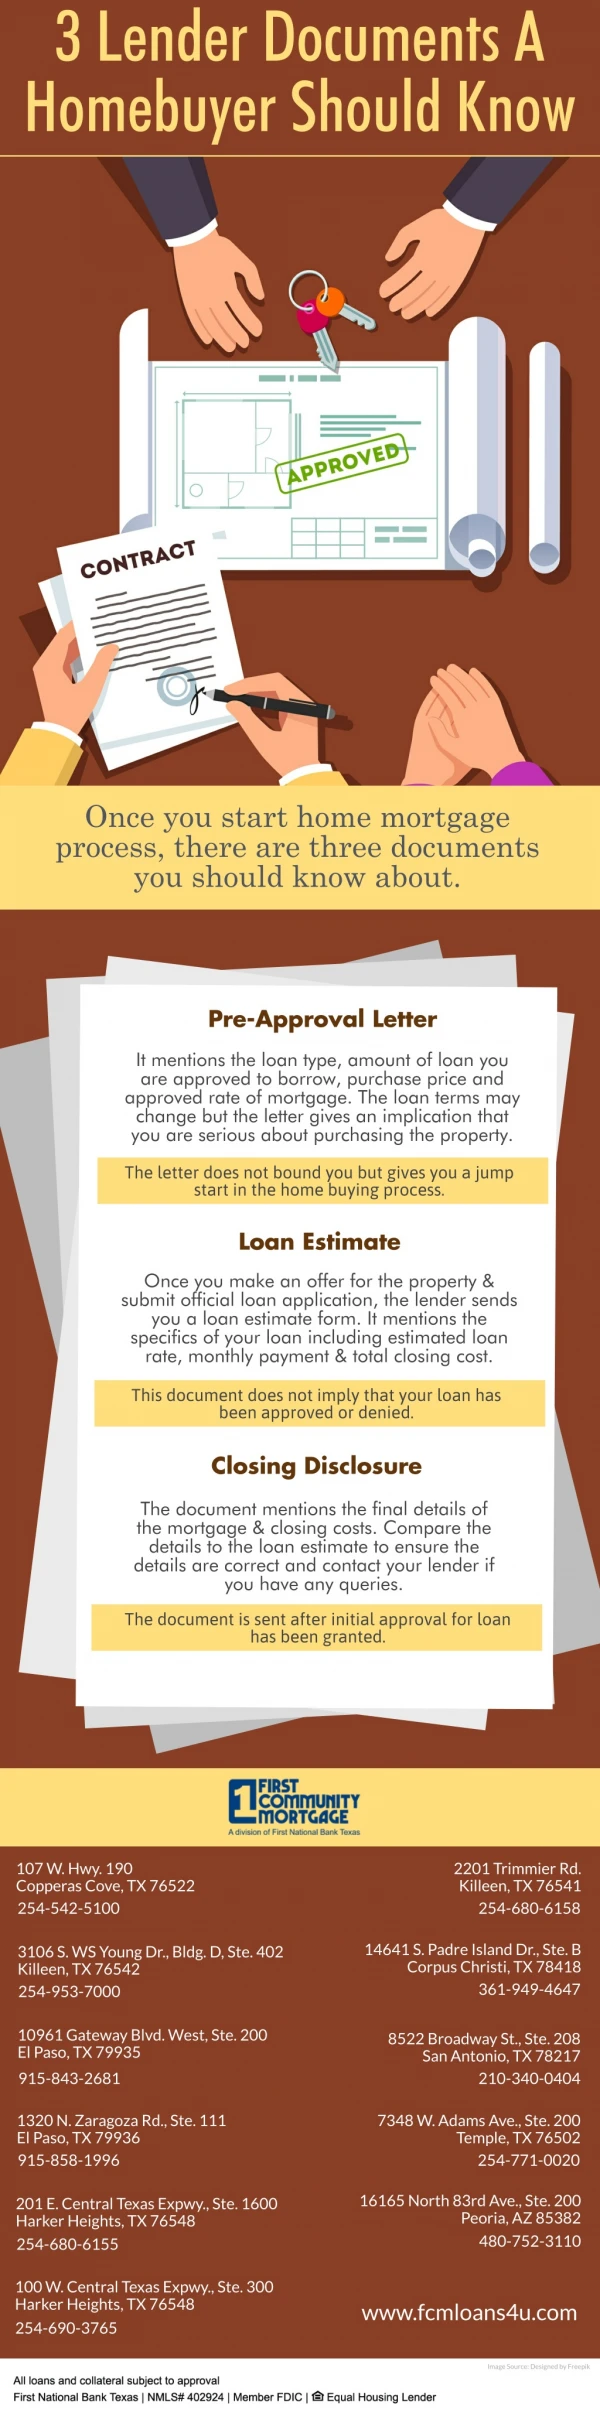 3 Lender Documents A Homebuyer Should Know